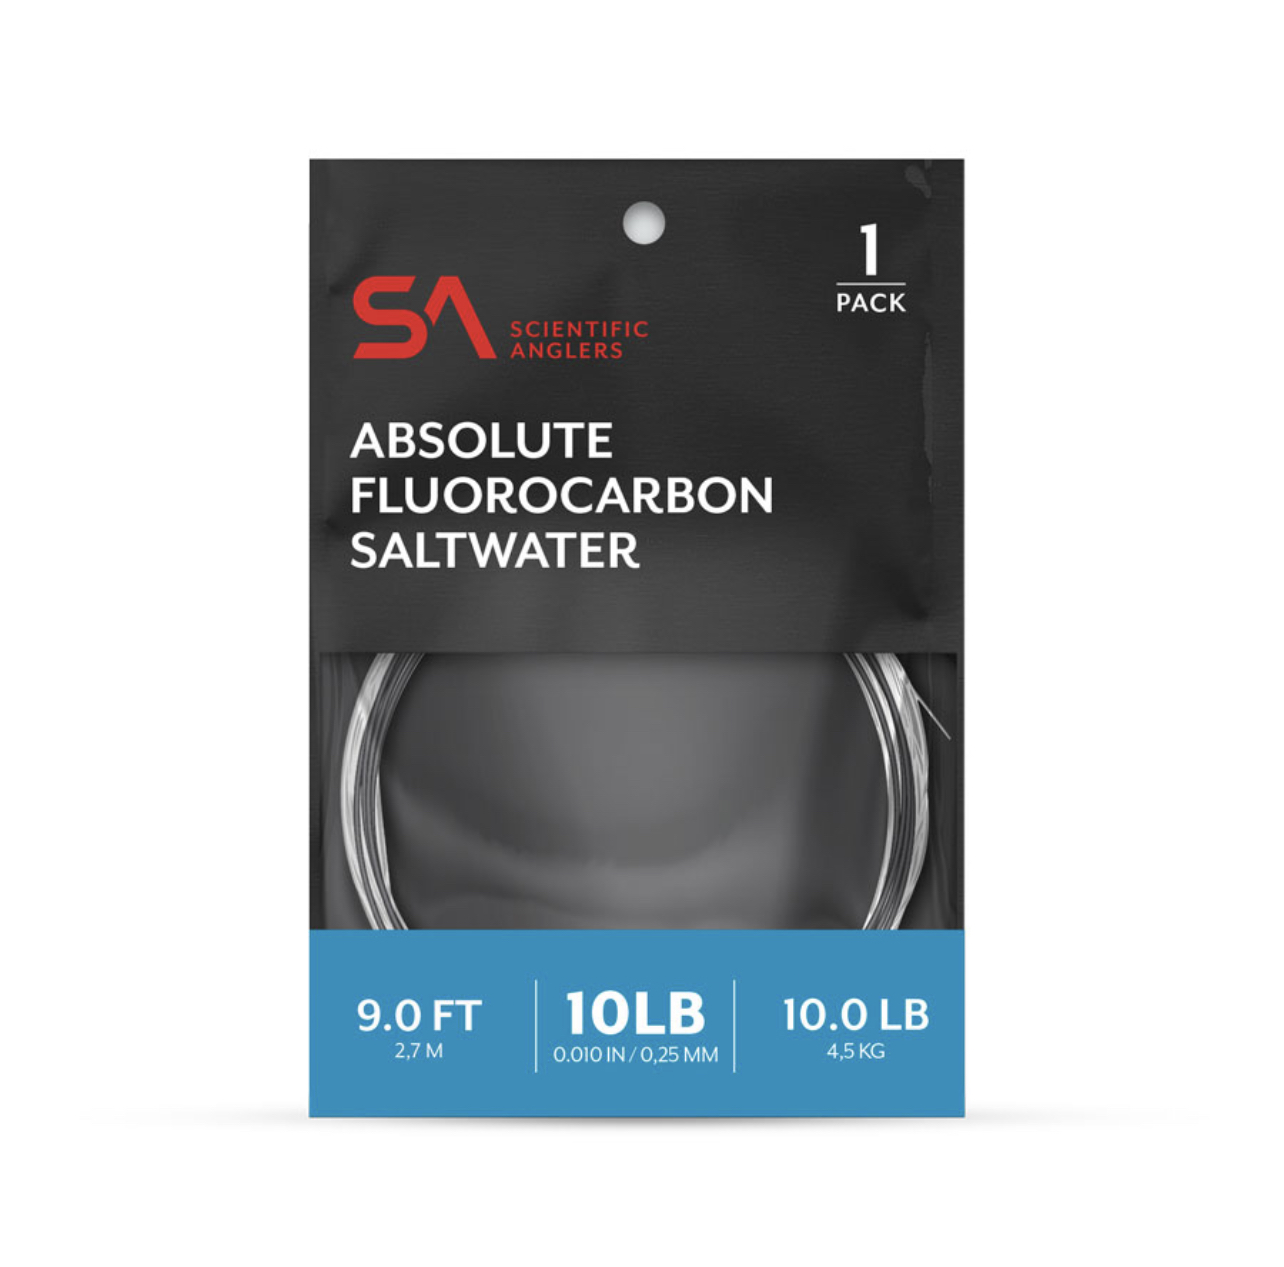 Absolute Fluorocarbon Saltwater